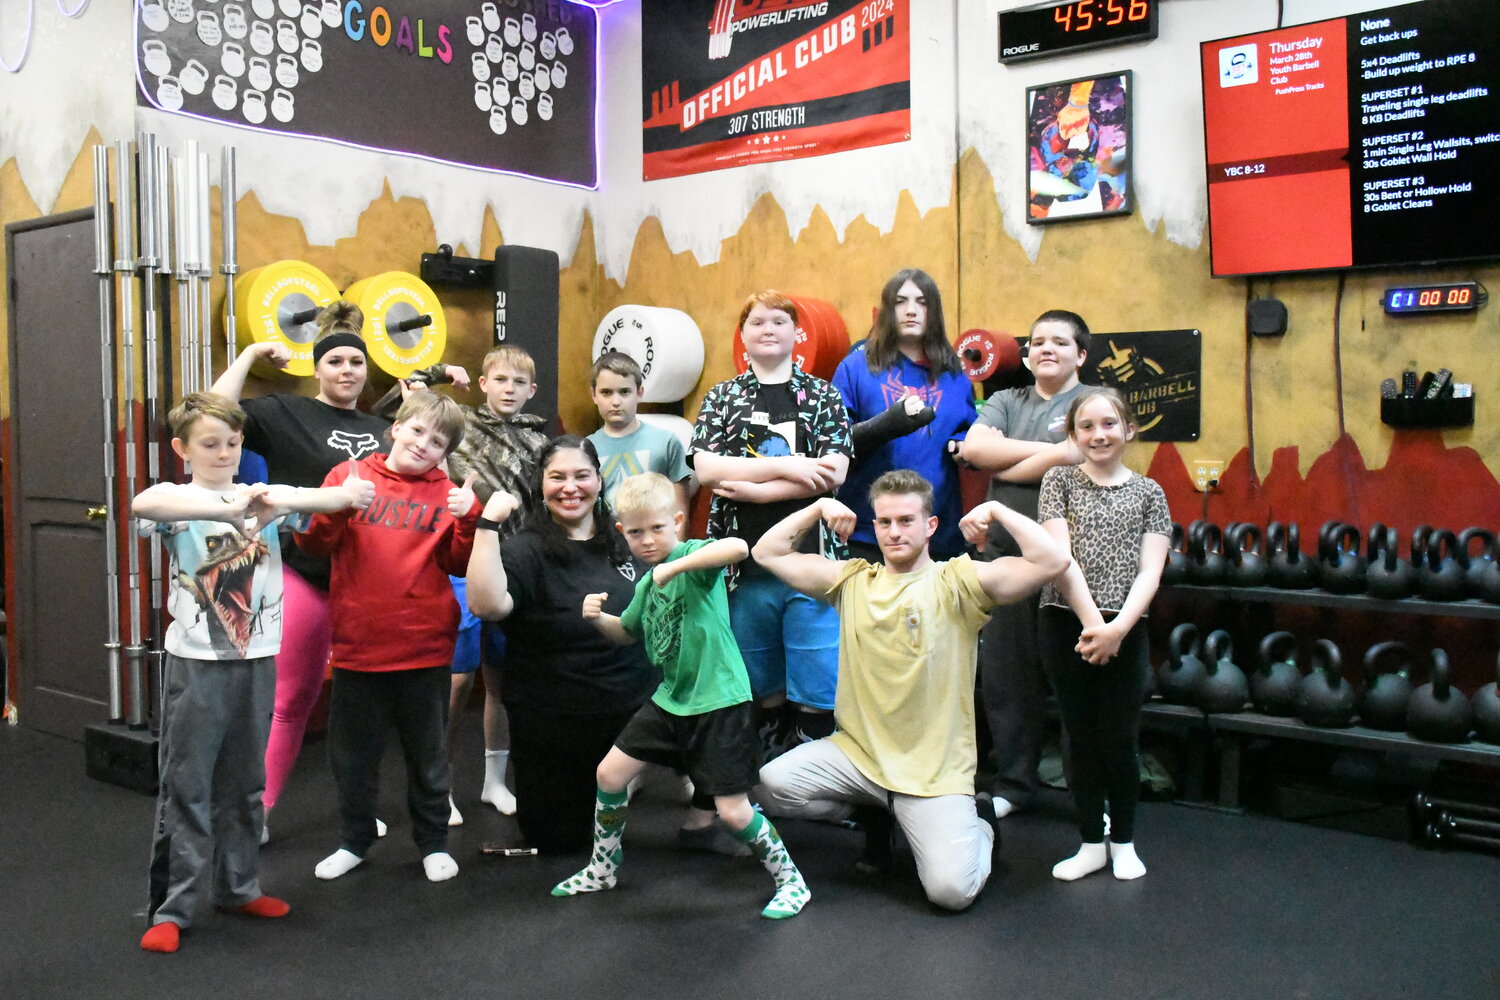 Some members of the 307 Strength Youth Barbell Club pose with their coaches after a training session. Pictured are Jaxxon Williams, coach Ashleigh Clyne, Samuel Manchester, Kole Garfield, coach Maggie Jones, Lincoln Kendrick, Hayes Garfield, Zander Heiner, coach Nate Gilmore, Henry Manchester, Ki Morris and Blare Albrecht.